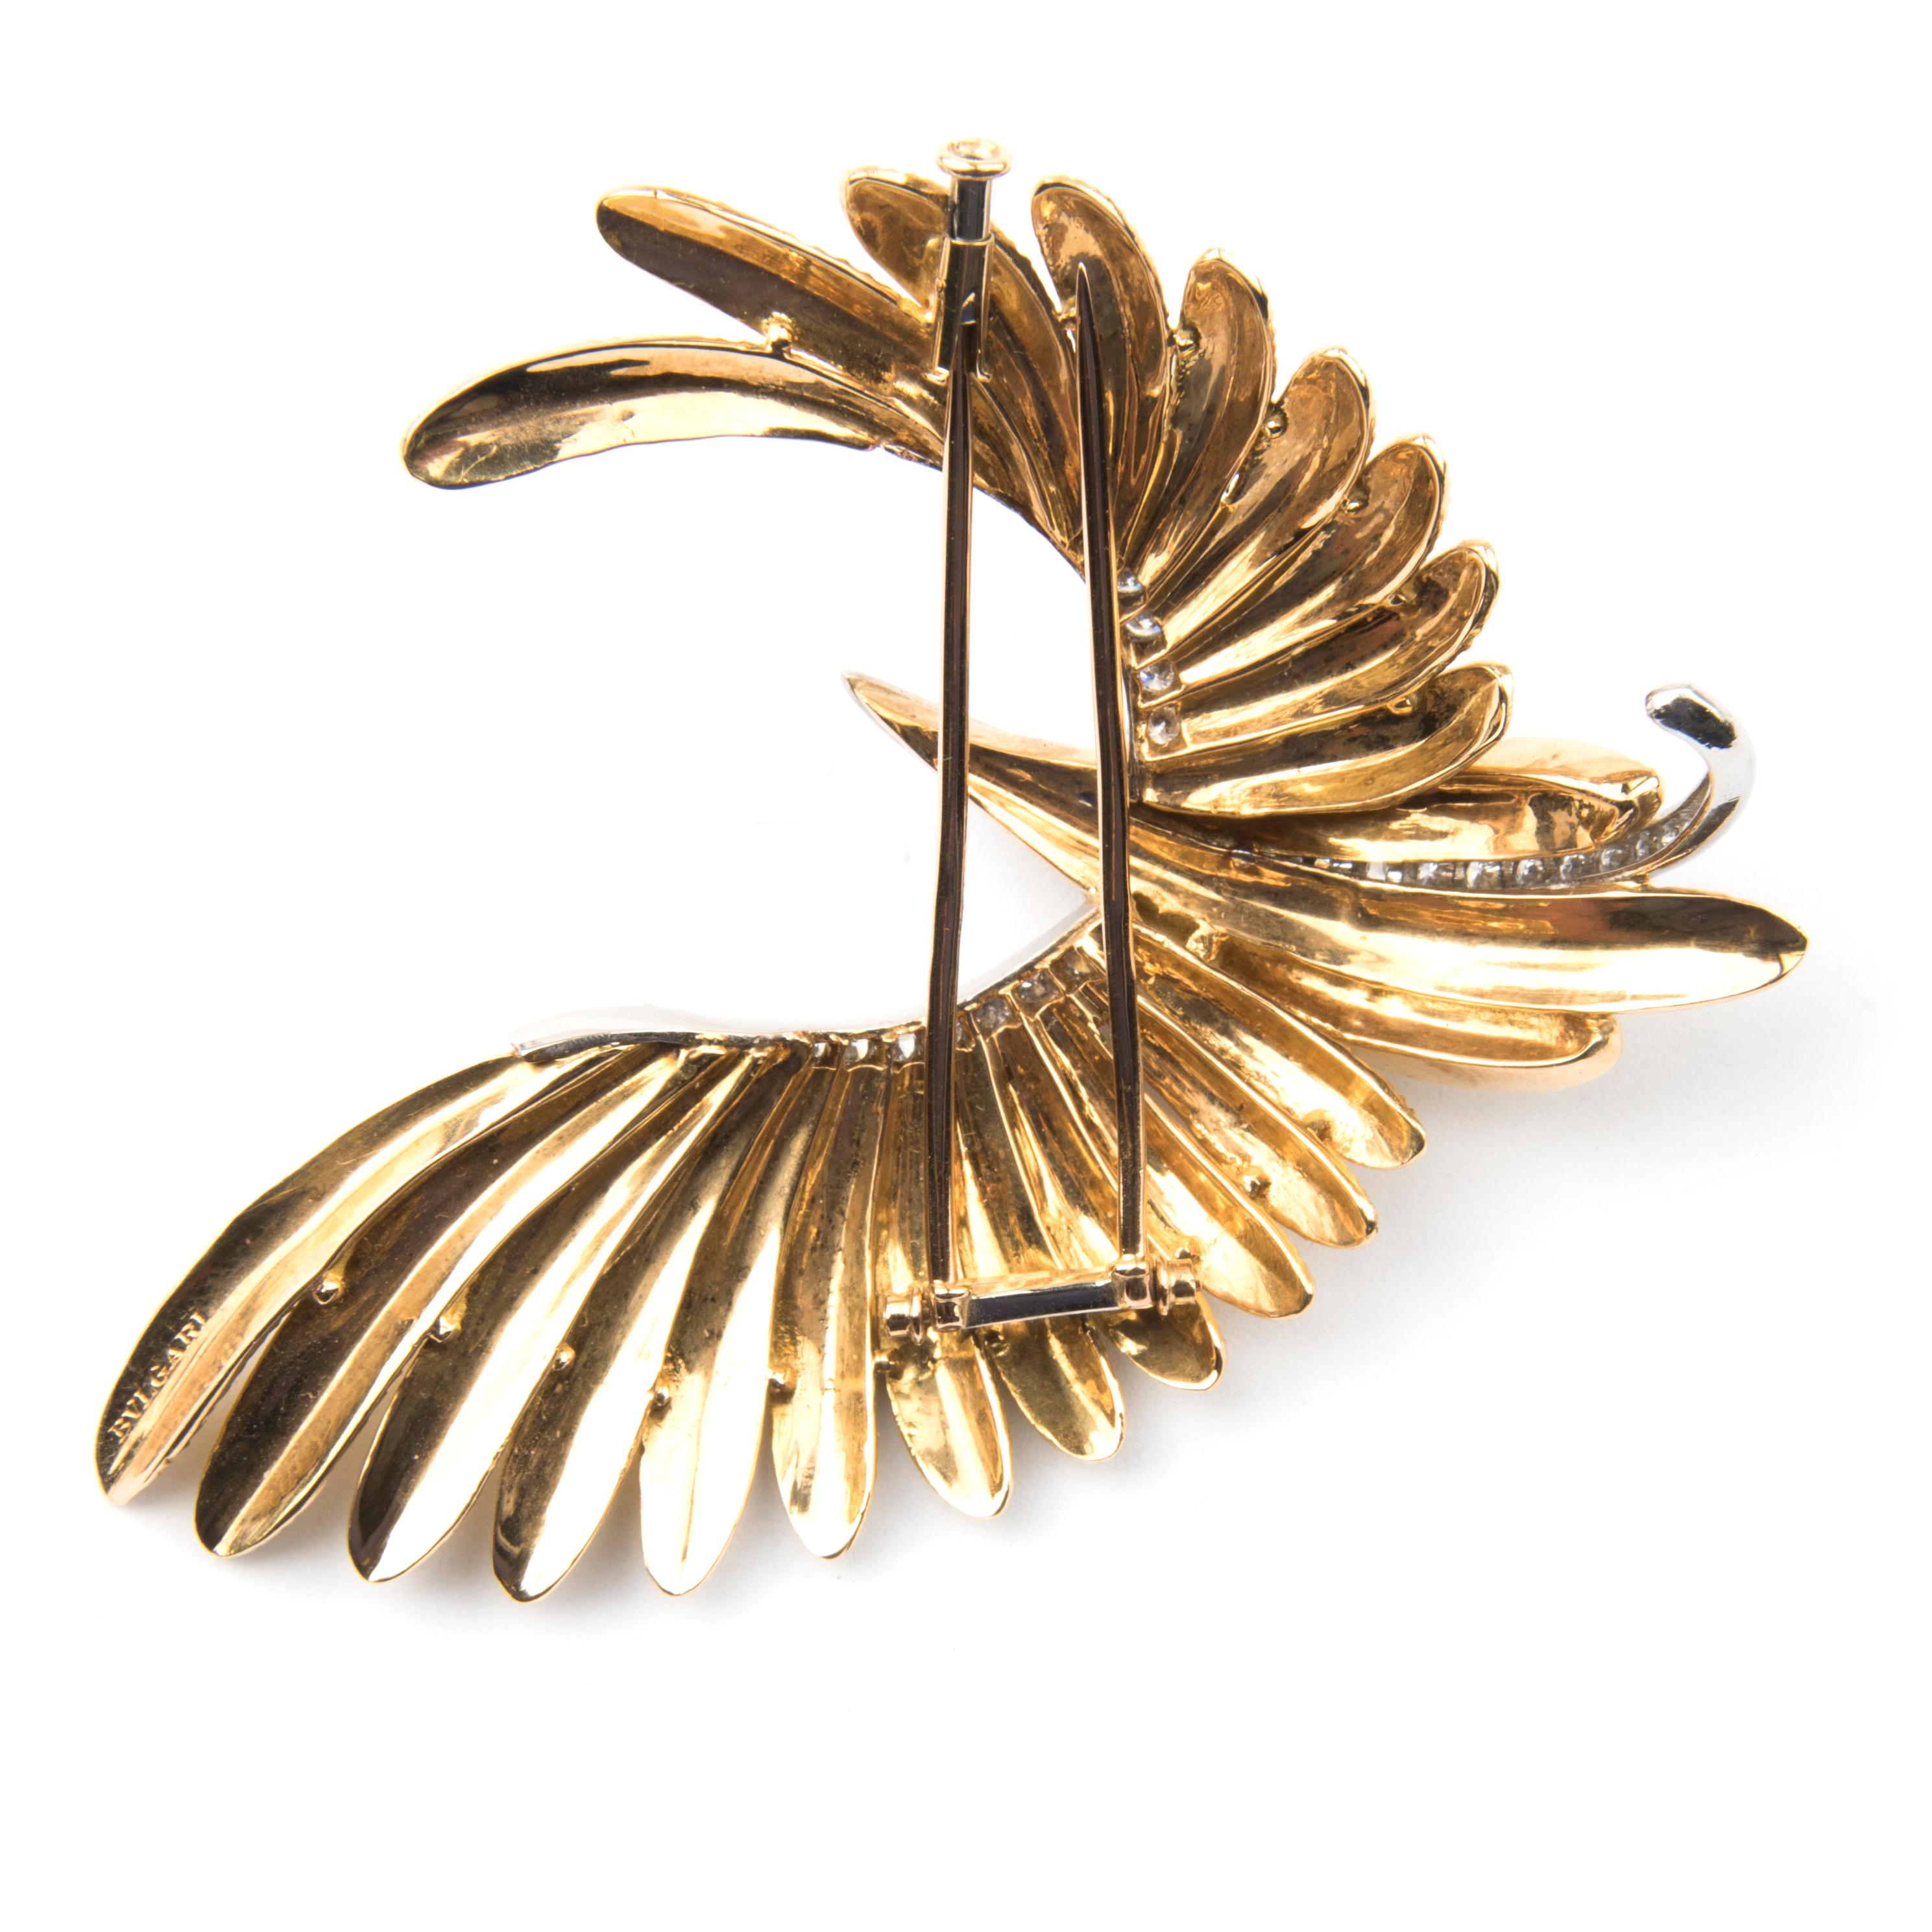 Bulgari brooch in the shape of a flying bird with feathers in 18k yellow gold, the stylised body platinum set with brilliant cut diamonds. Probably unique.
Signed Bulgari
Circa 1970
In original box